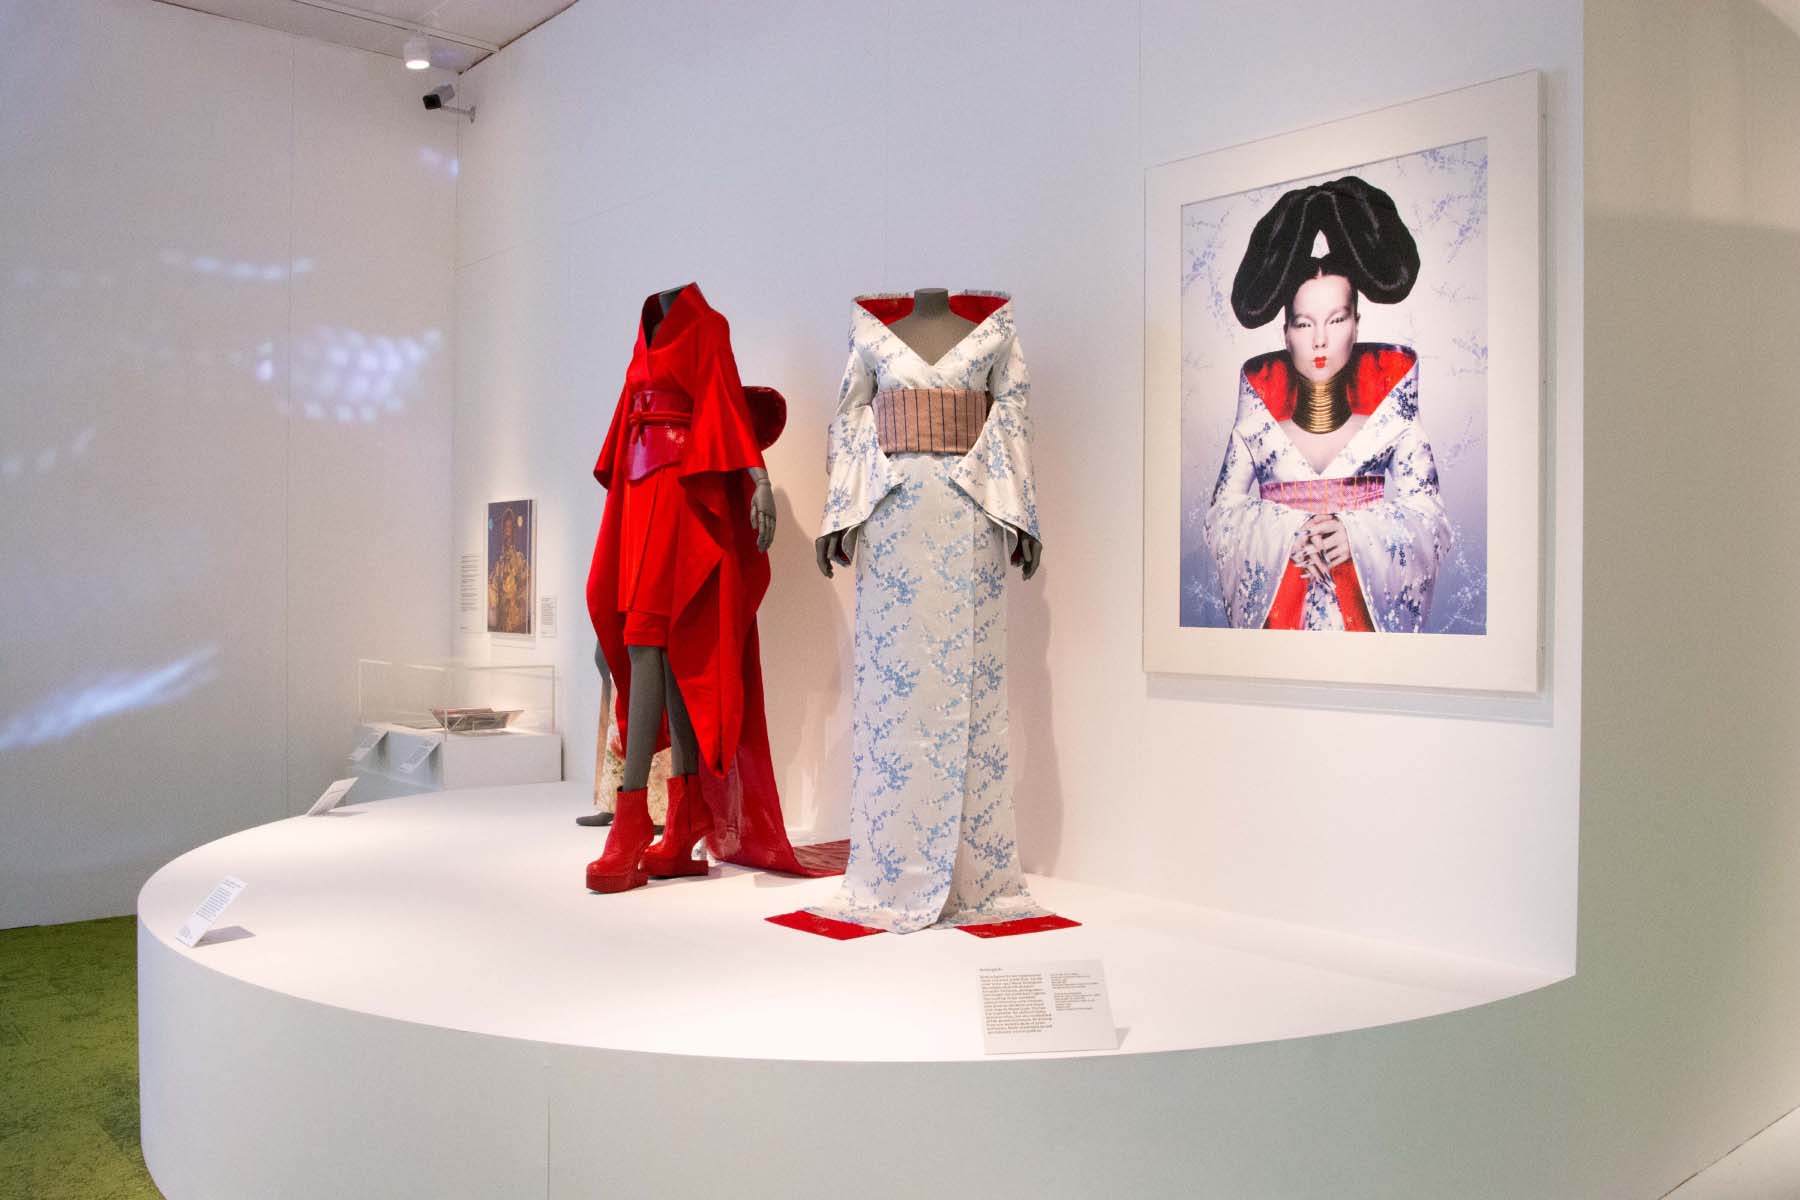 Yoshikimono partners with V&A on it's new exhibition